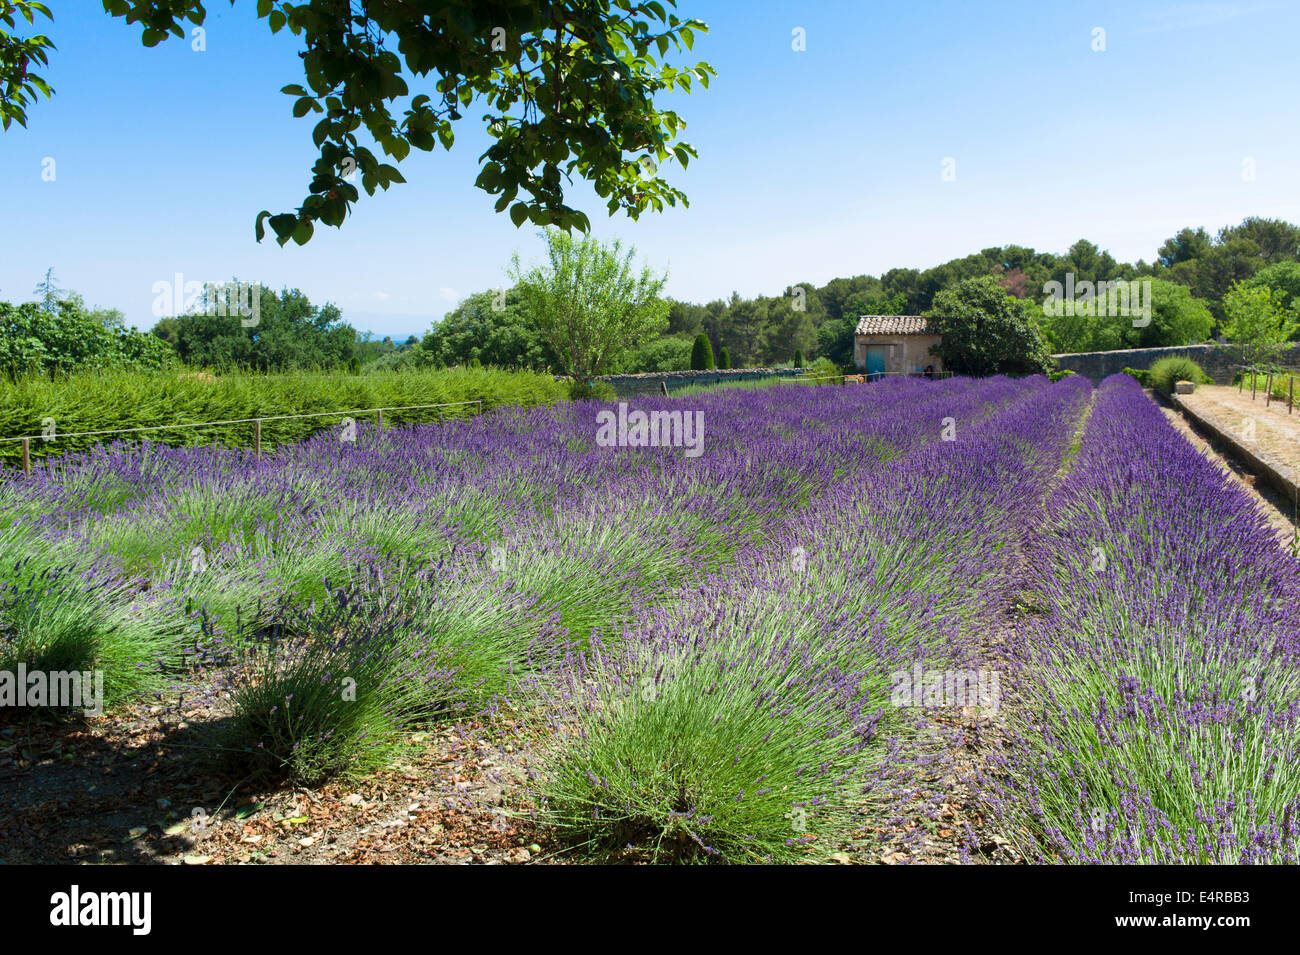 A Lavender field in Saint-Paul Asylum, Saint-Rémy where Van Gogh the artist  was committed from May 1889 until May 1890 Stock Photo - Alamy